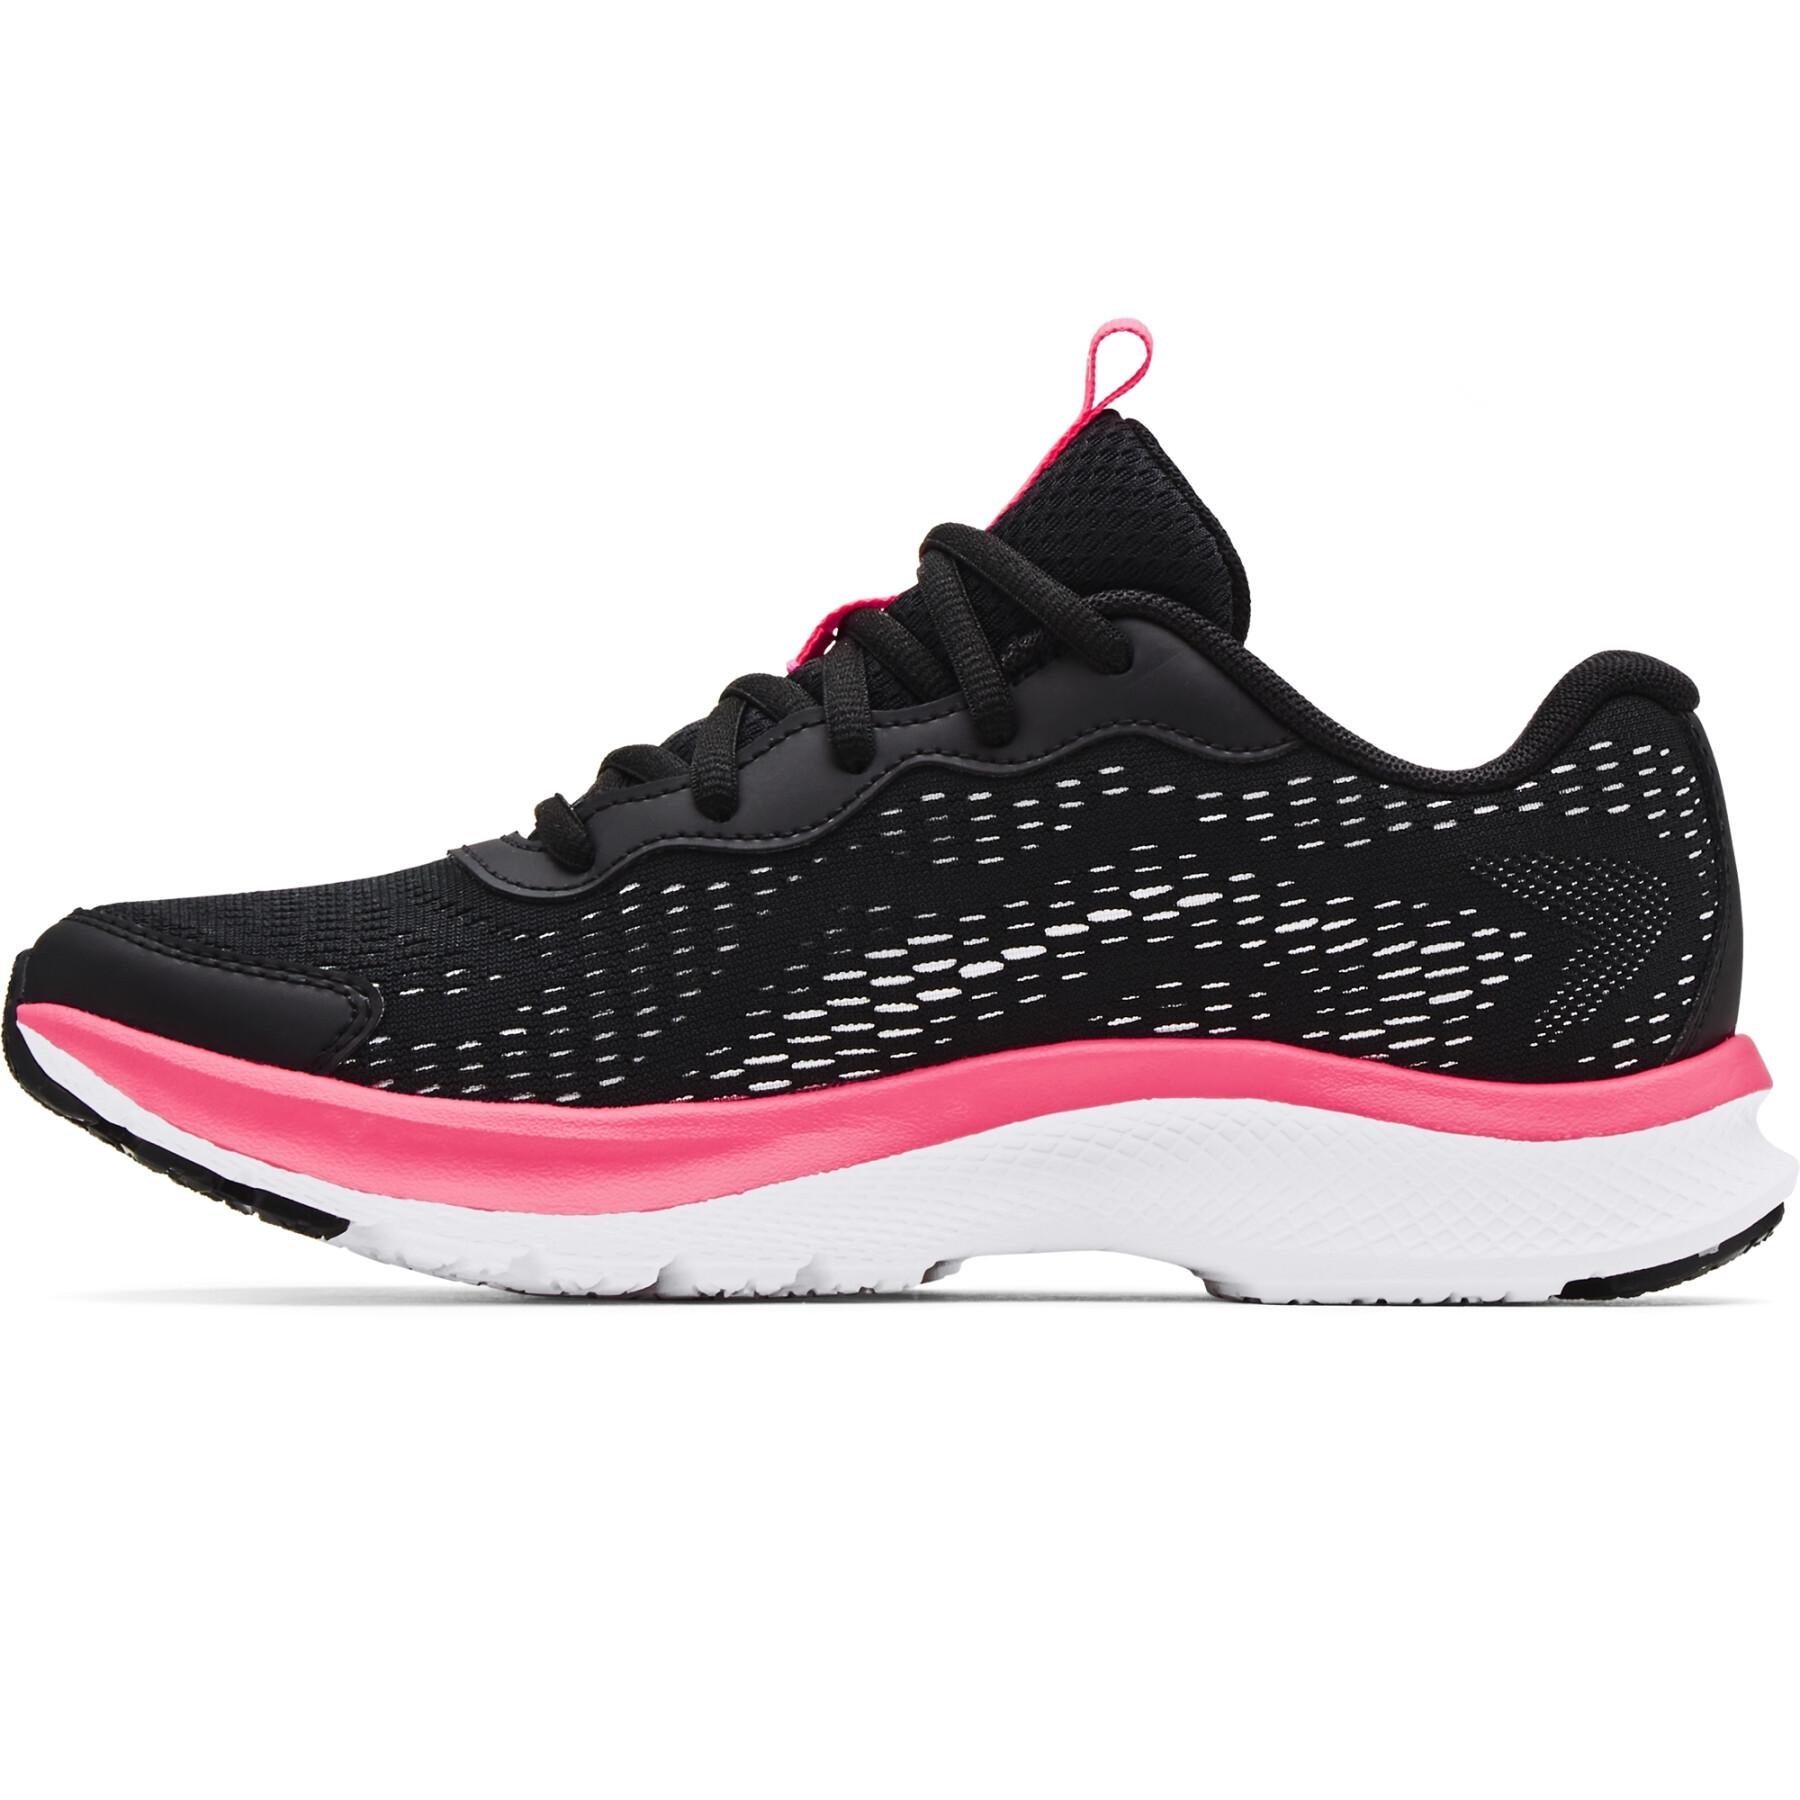 Running shoes grade school girl Under Armour Charged Bandit 7